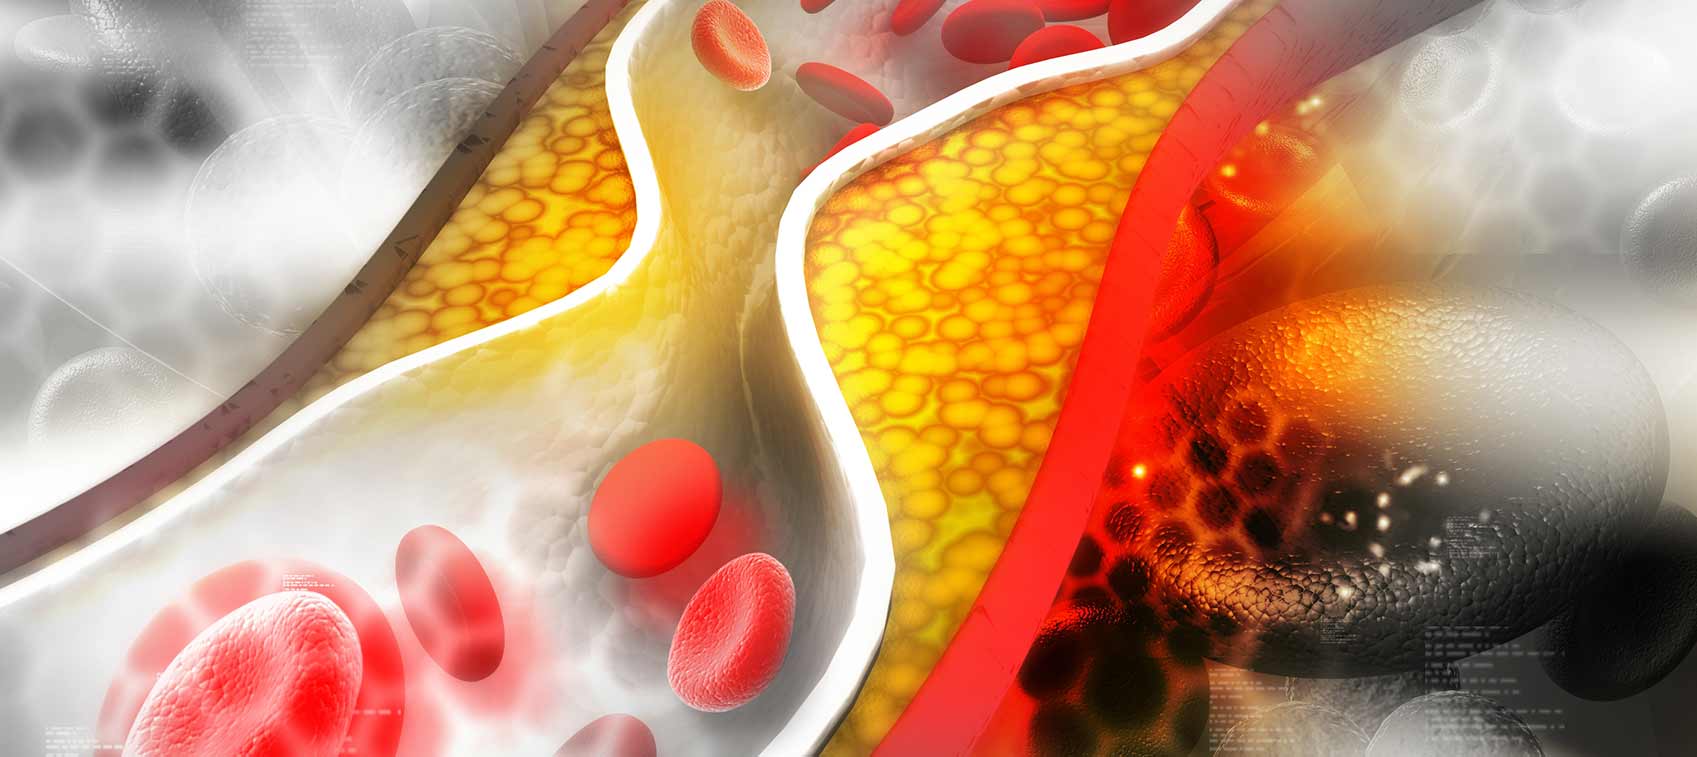 What is cholesterol and dangerous for health?